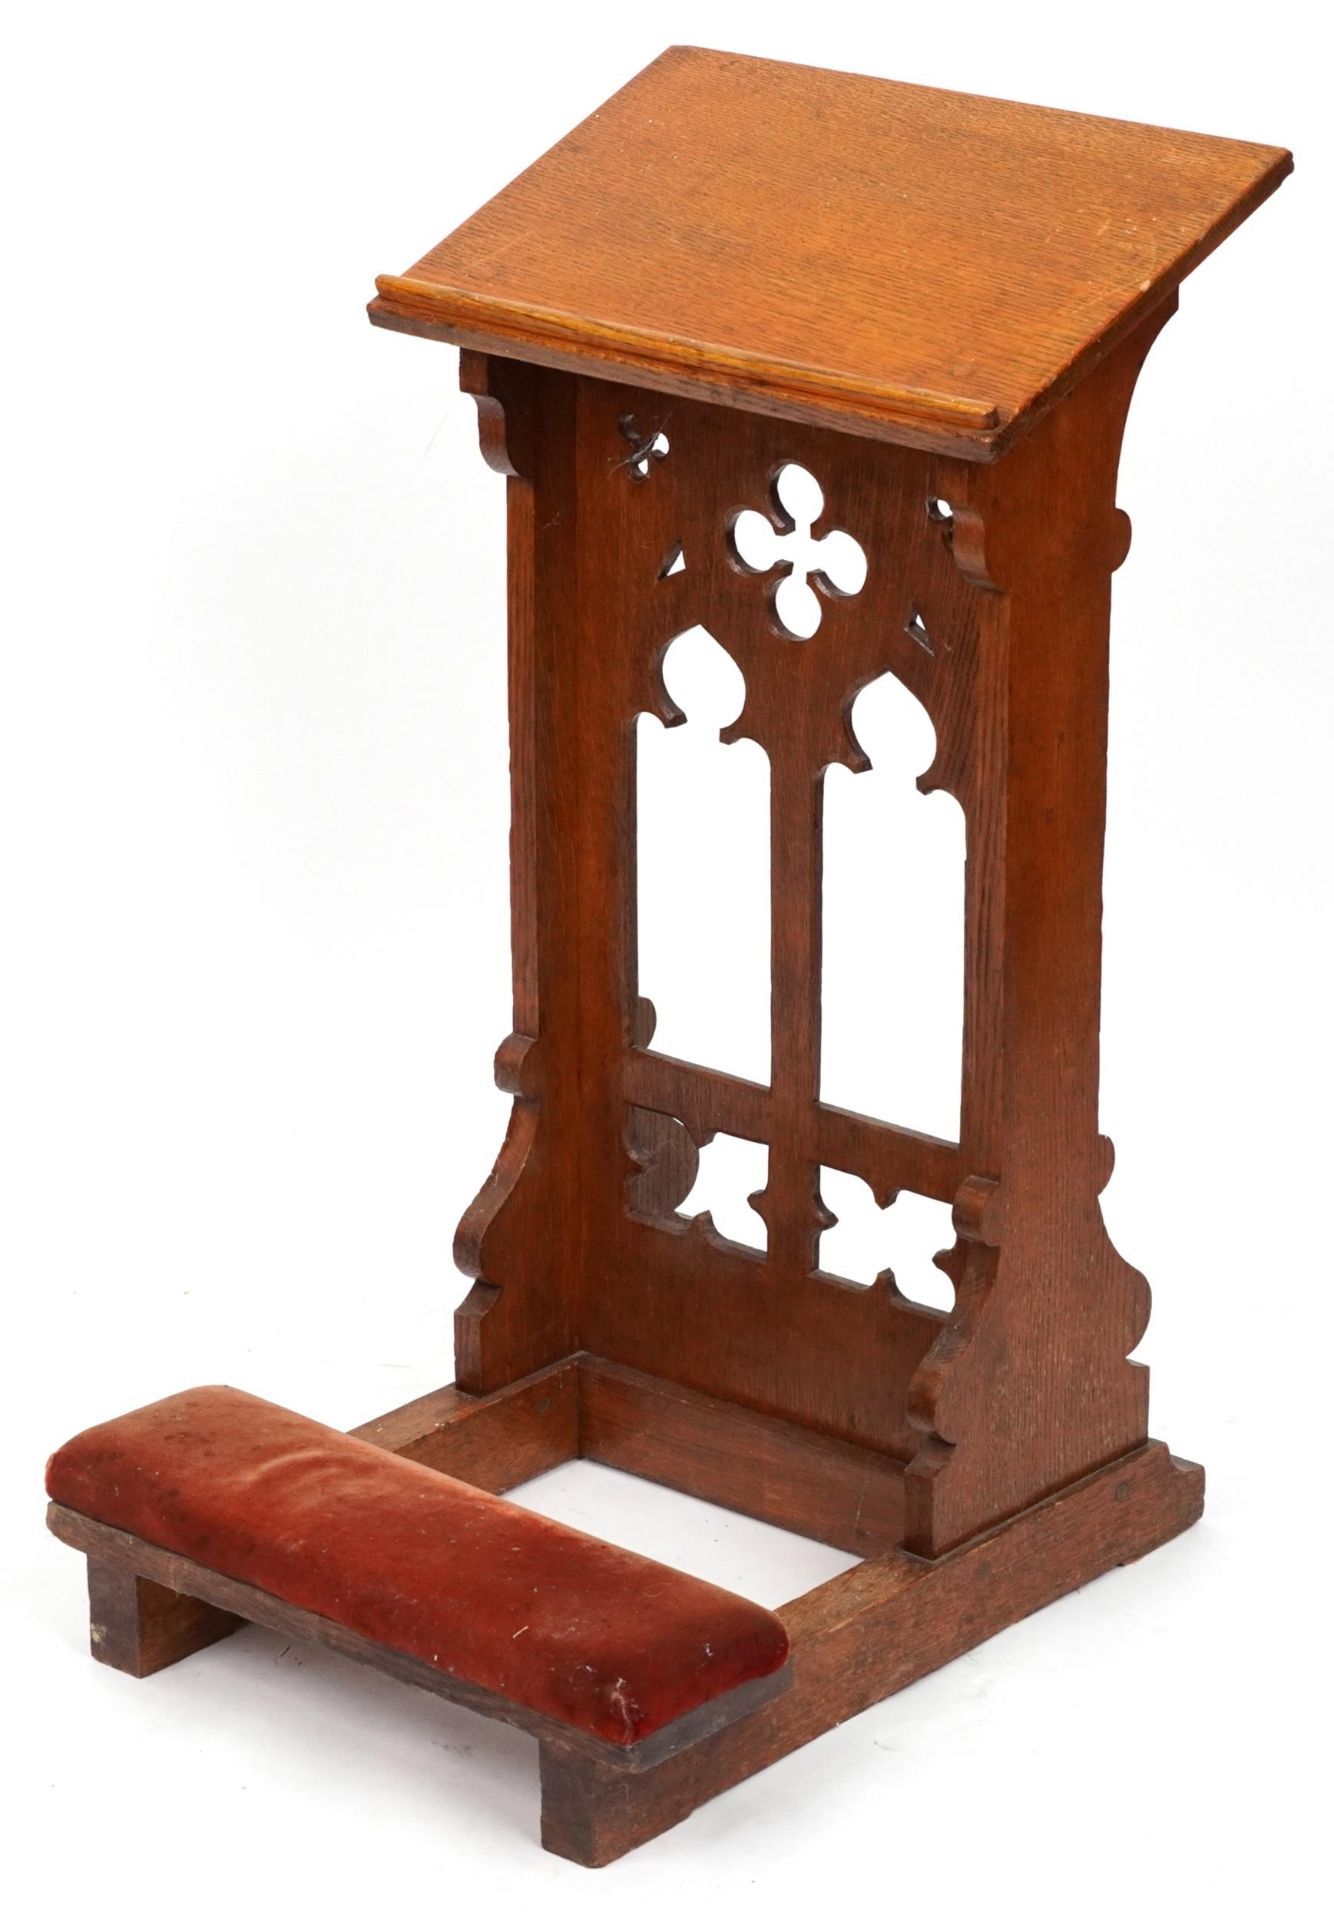 Gothic oak ecclesiastical kneeling pew, 87cm high : For further information on this lot please visit